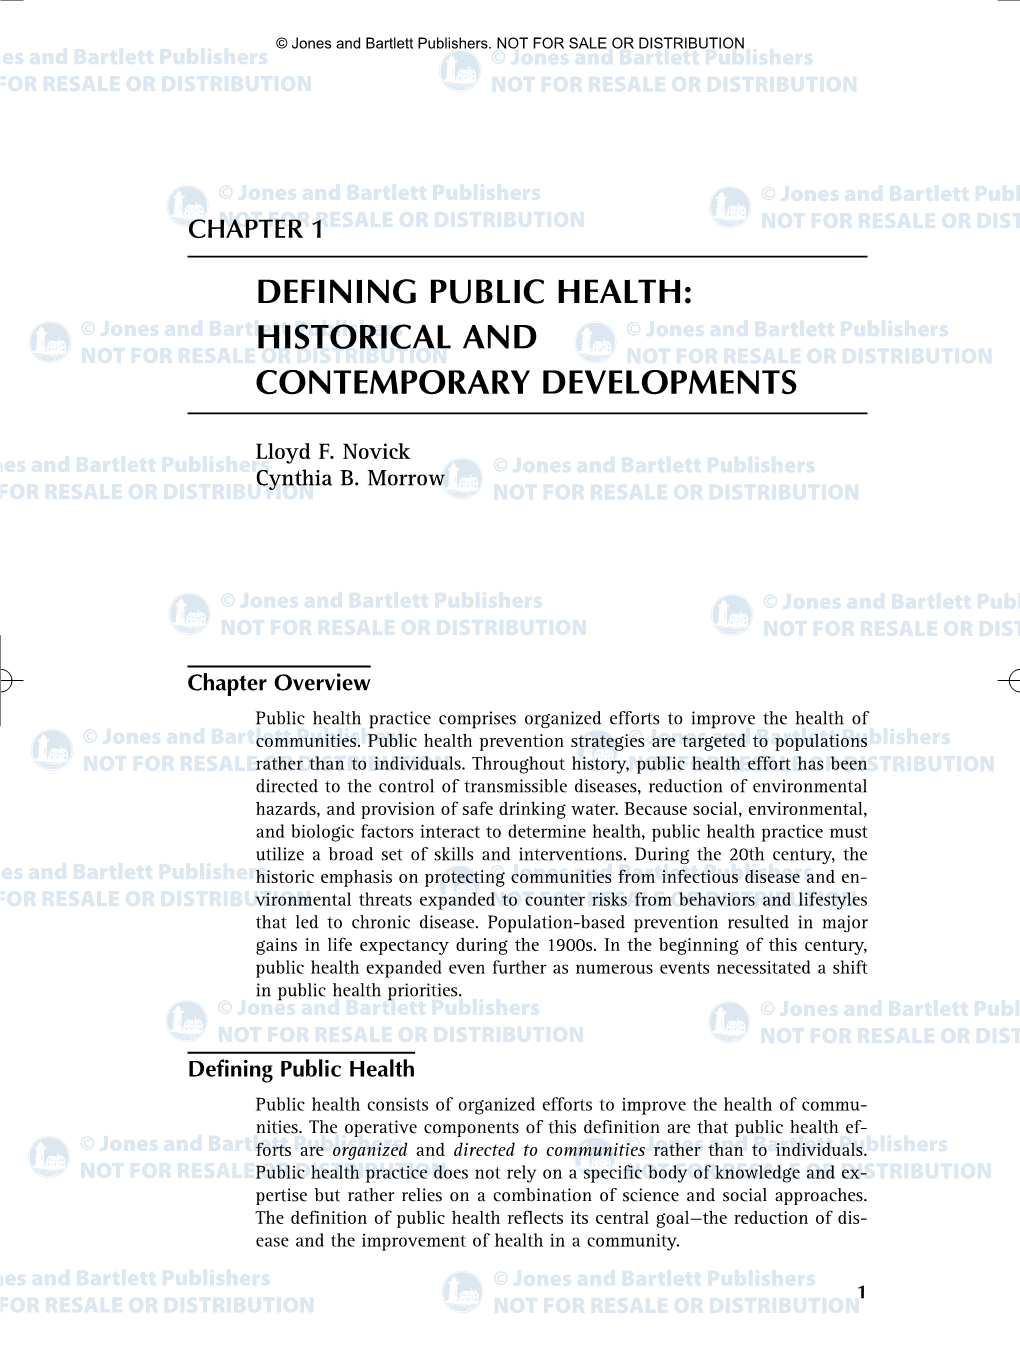 Defining Public Health: Historical and Contemporary Developments